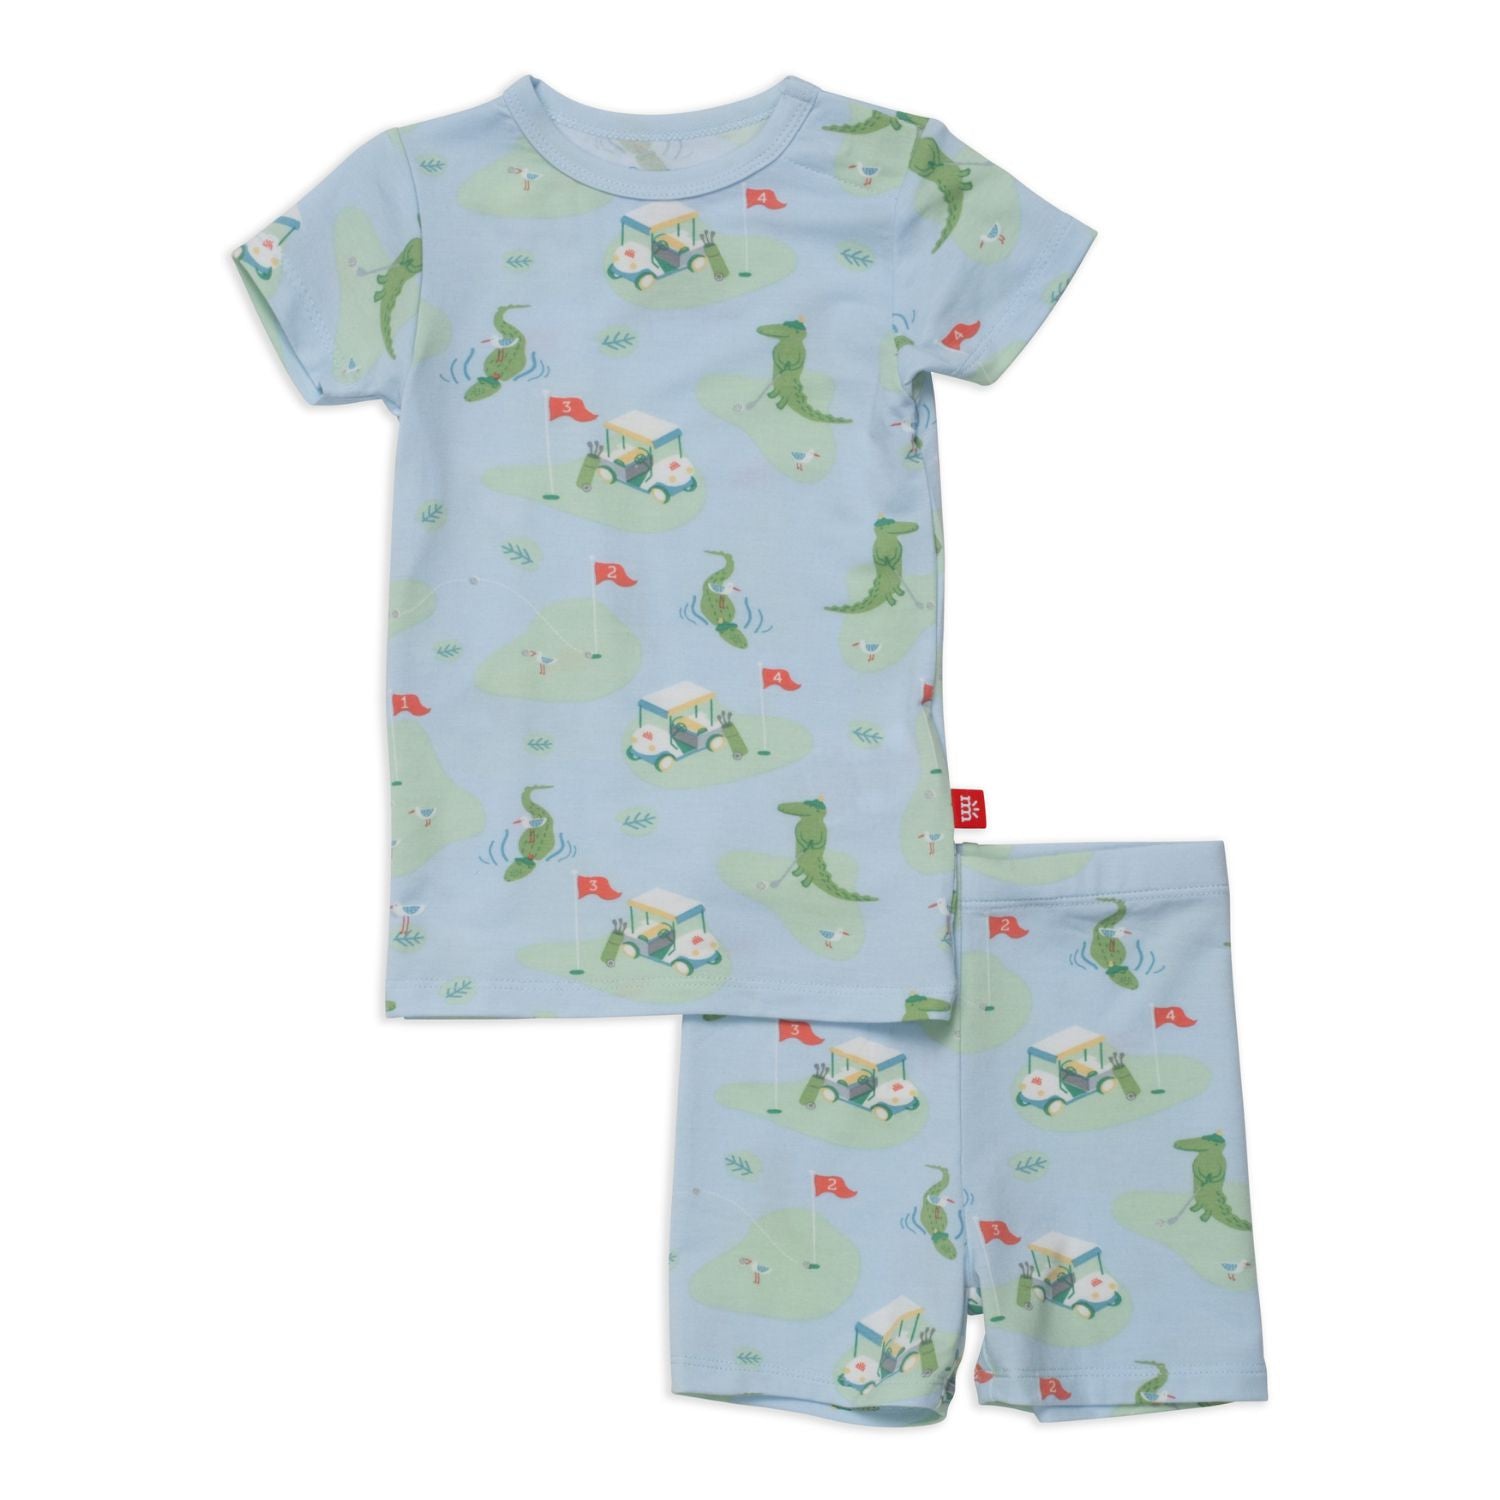 A Putt Above Modal Magnetic Toddler Shortie Pajama Set